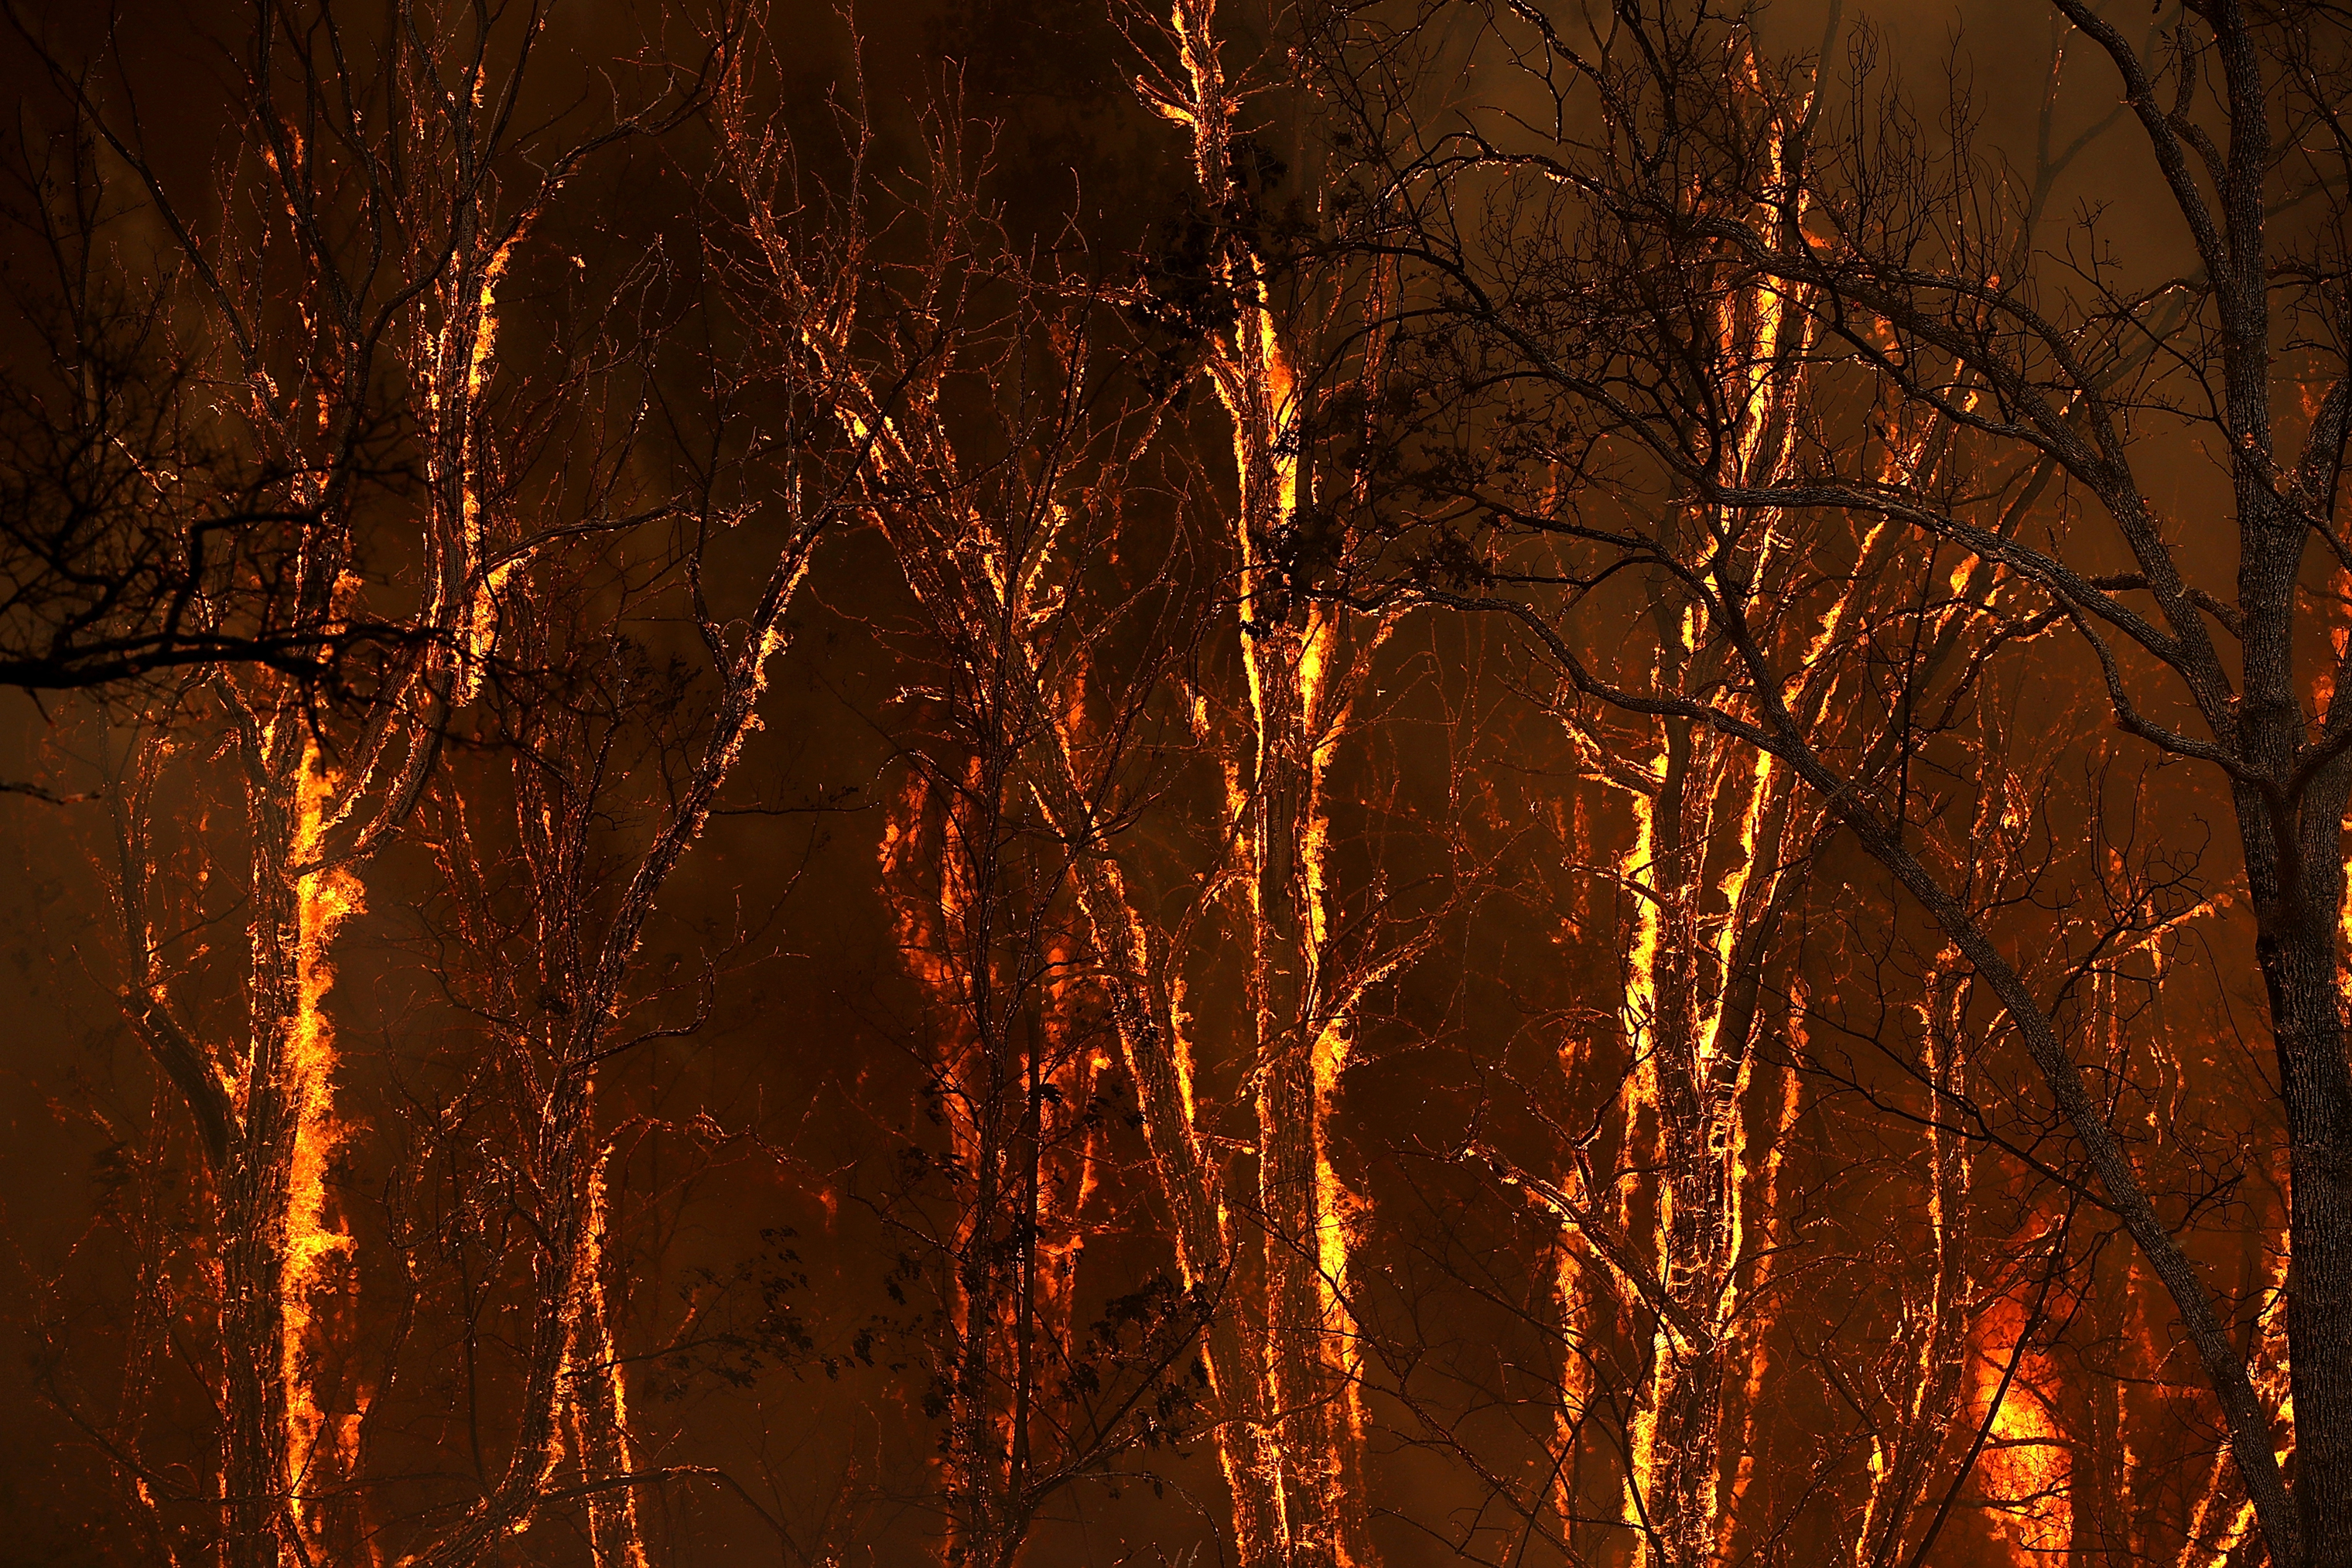 Flames from the Carr Fire burns through trees along highway 299 near Whiskeytown, Calif. on July 27. (Justin Sullivan—Getty Images)